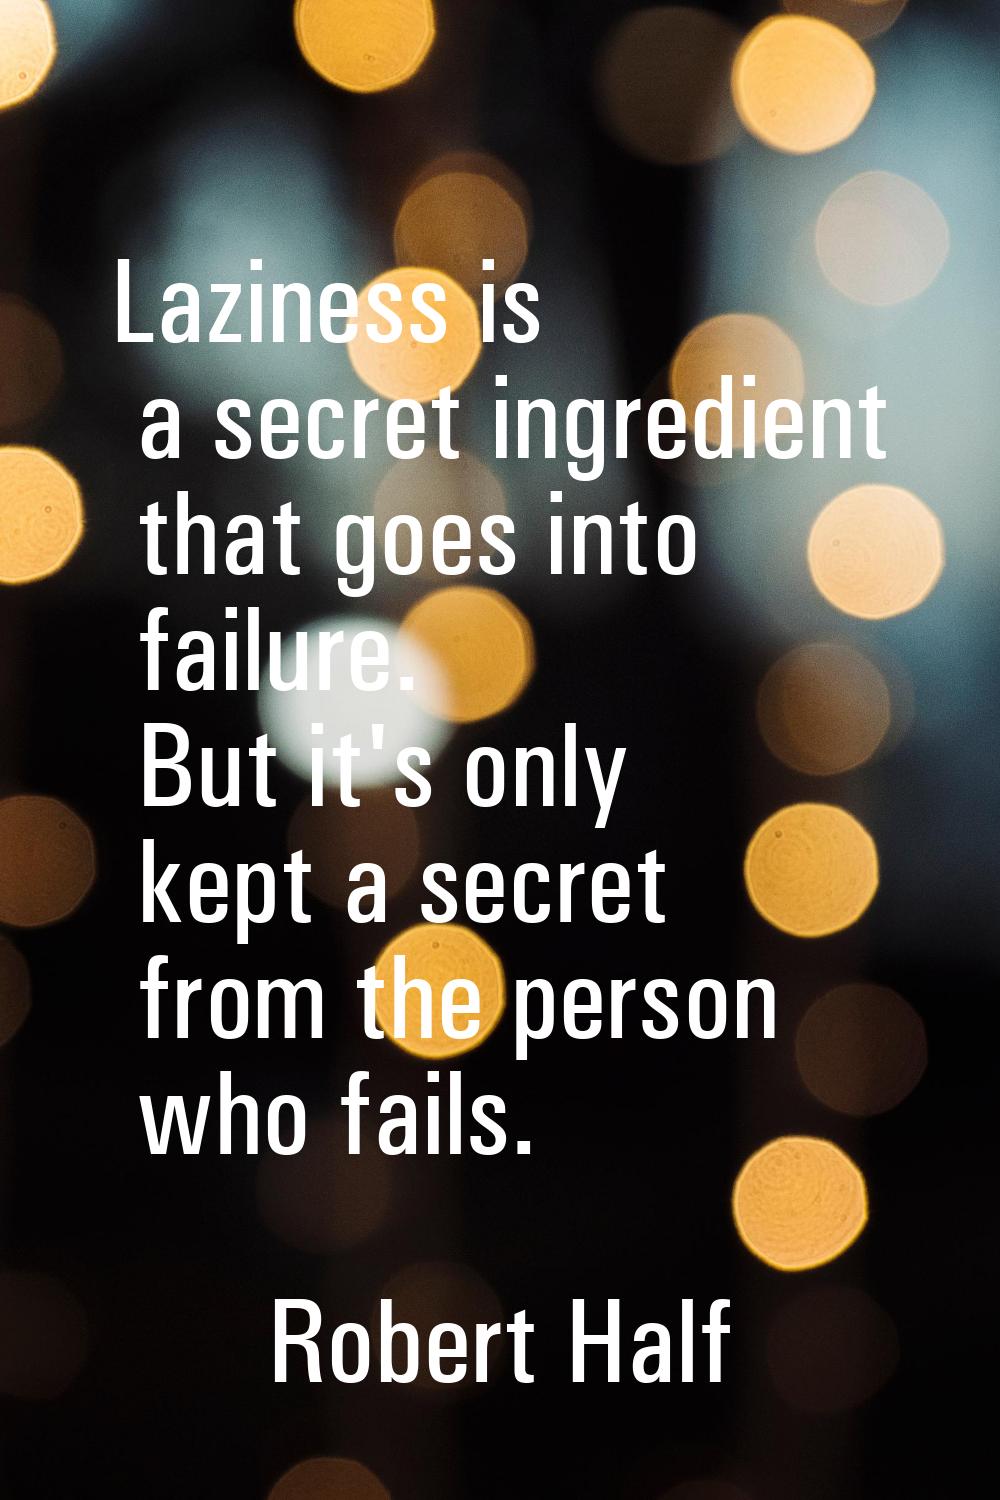 Laziness is a secret ingredient that goes into failure. But it's only kept a secret from the person